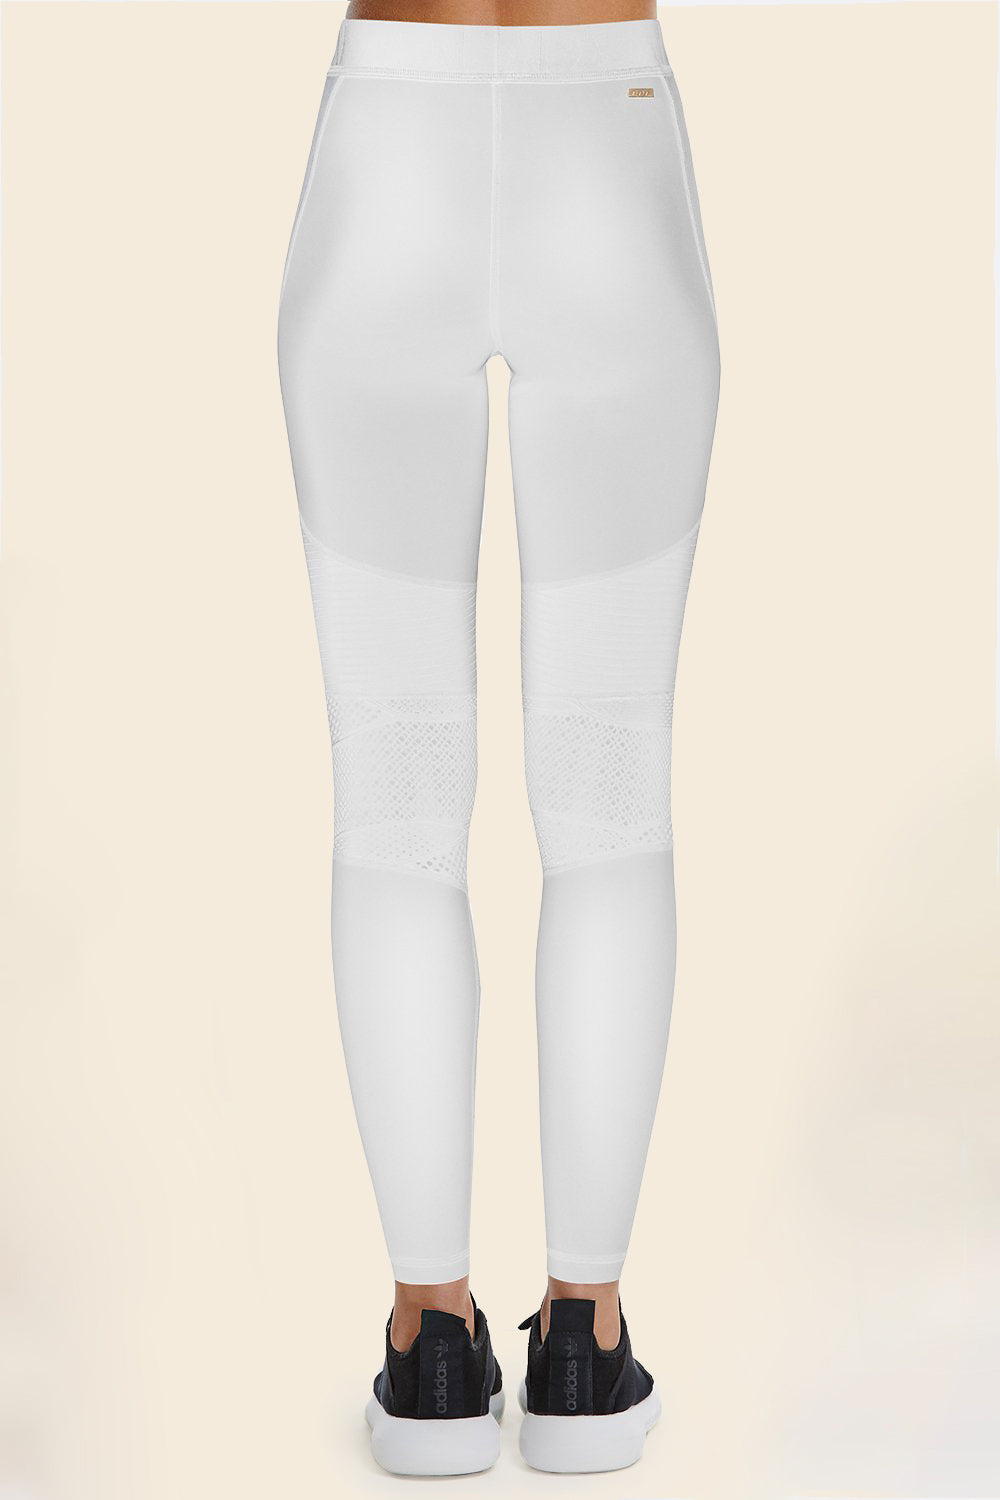 Back view of Alala Women's Luxury Athleisure harley tight in white with lace detailing